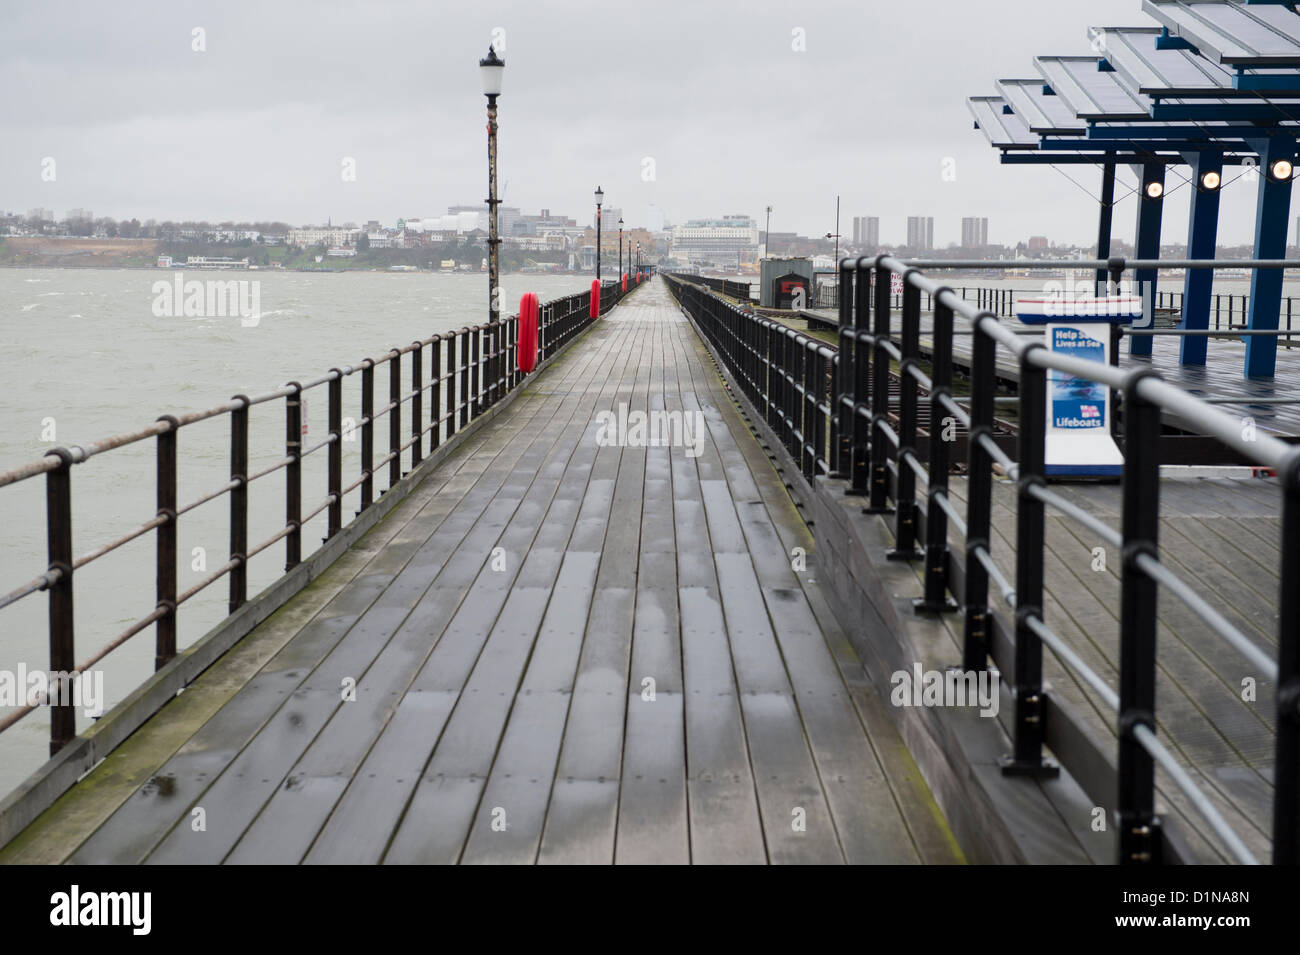 Southend on Sea, Essex. A wet and windy day on Southend Pier, the world's longest pleasure pier at 1 and 1/4 miles long. The weather kept most people away on this day.  Credit:  Allsorts Stock Photo / Alamy Live News Stock Photo